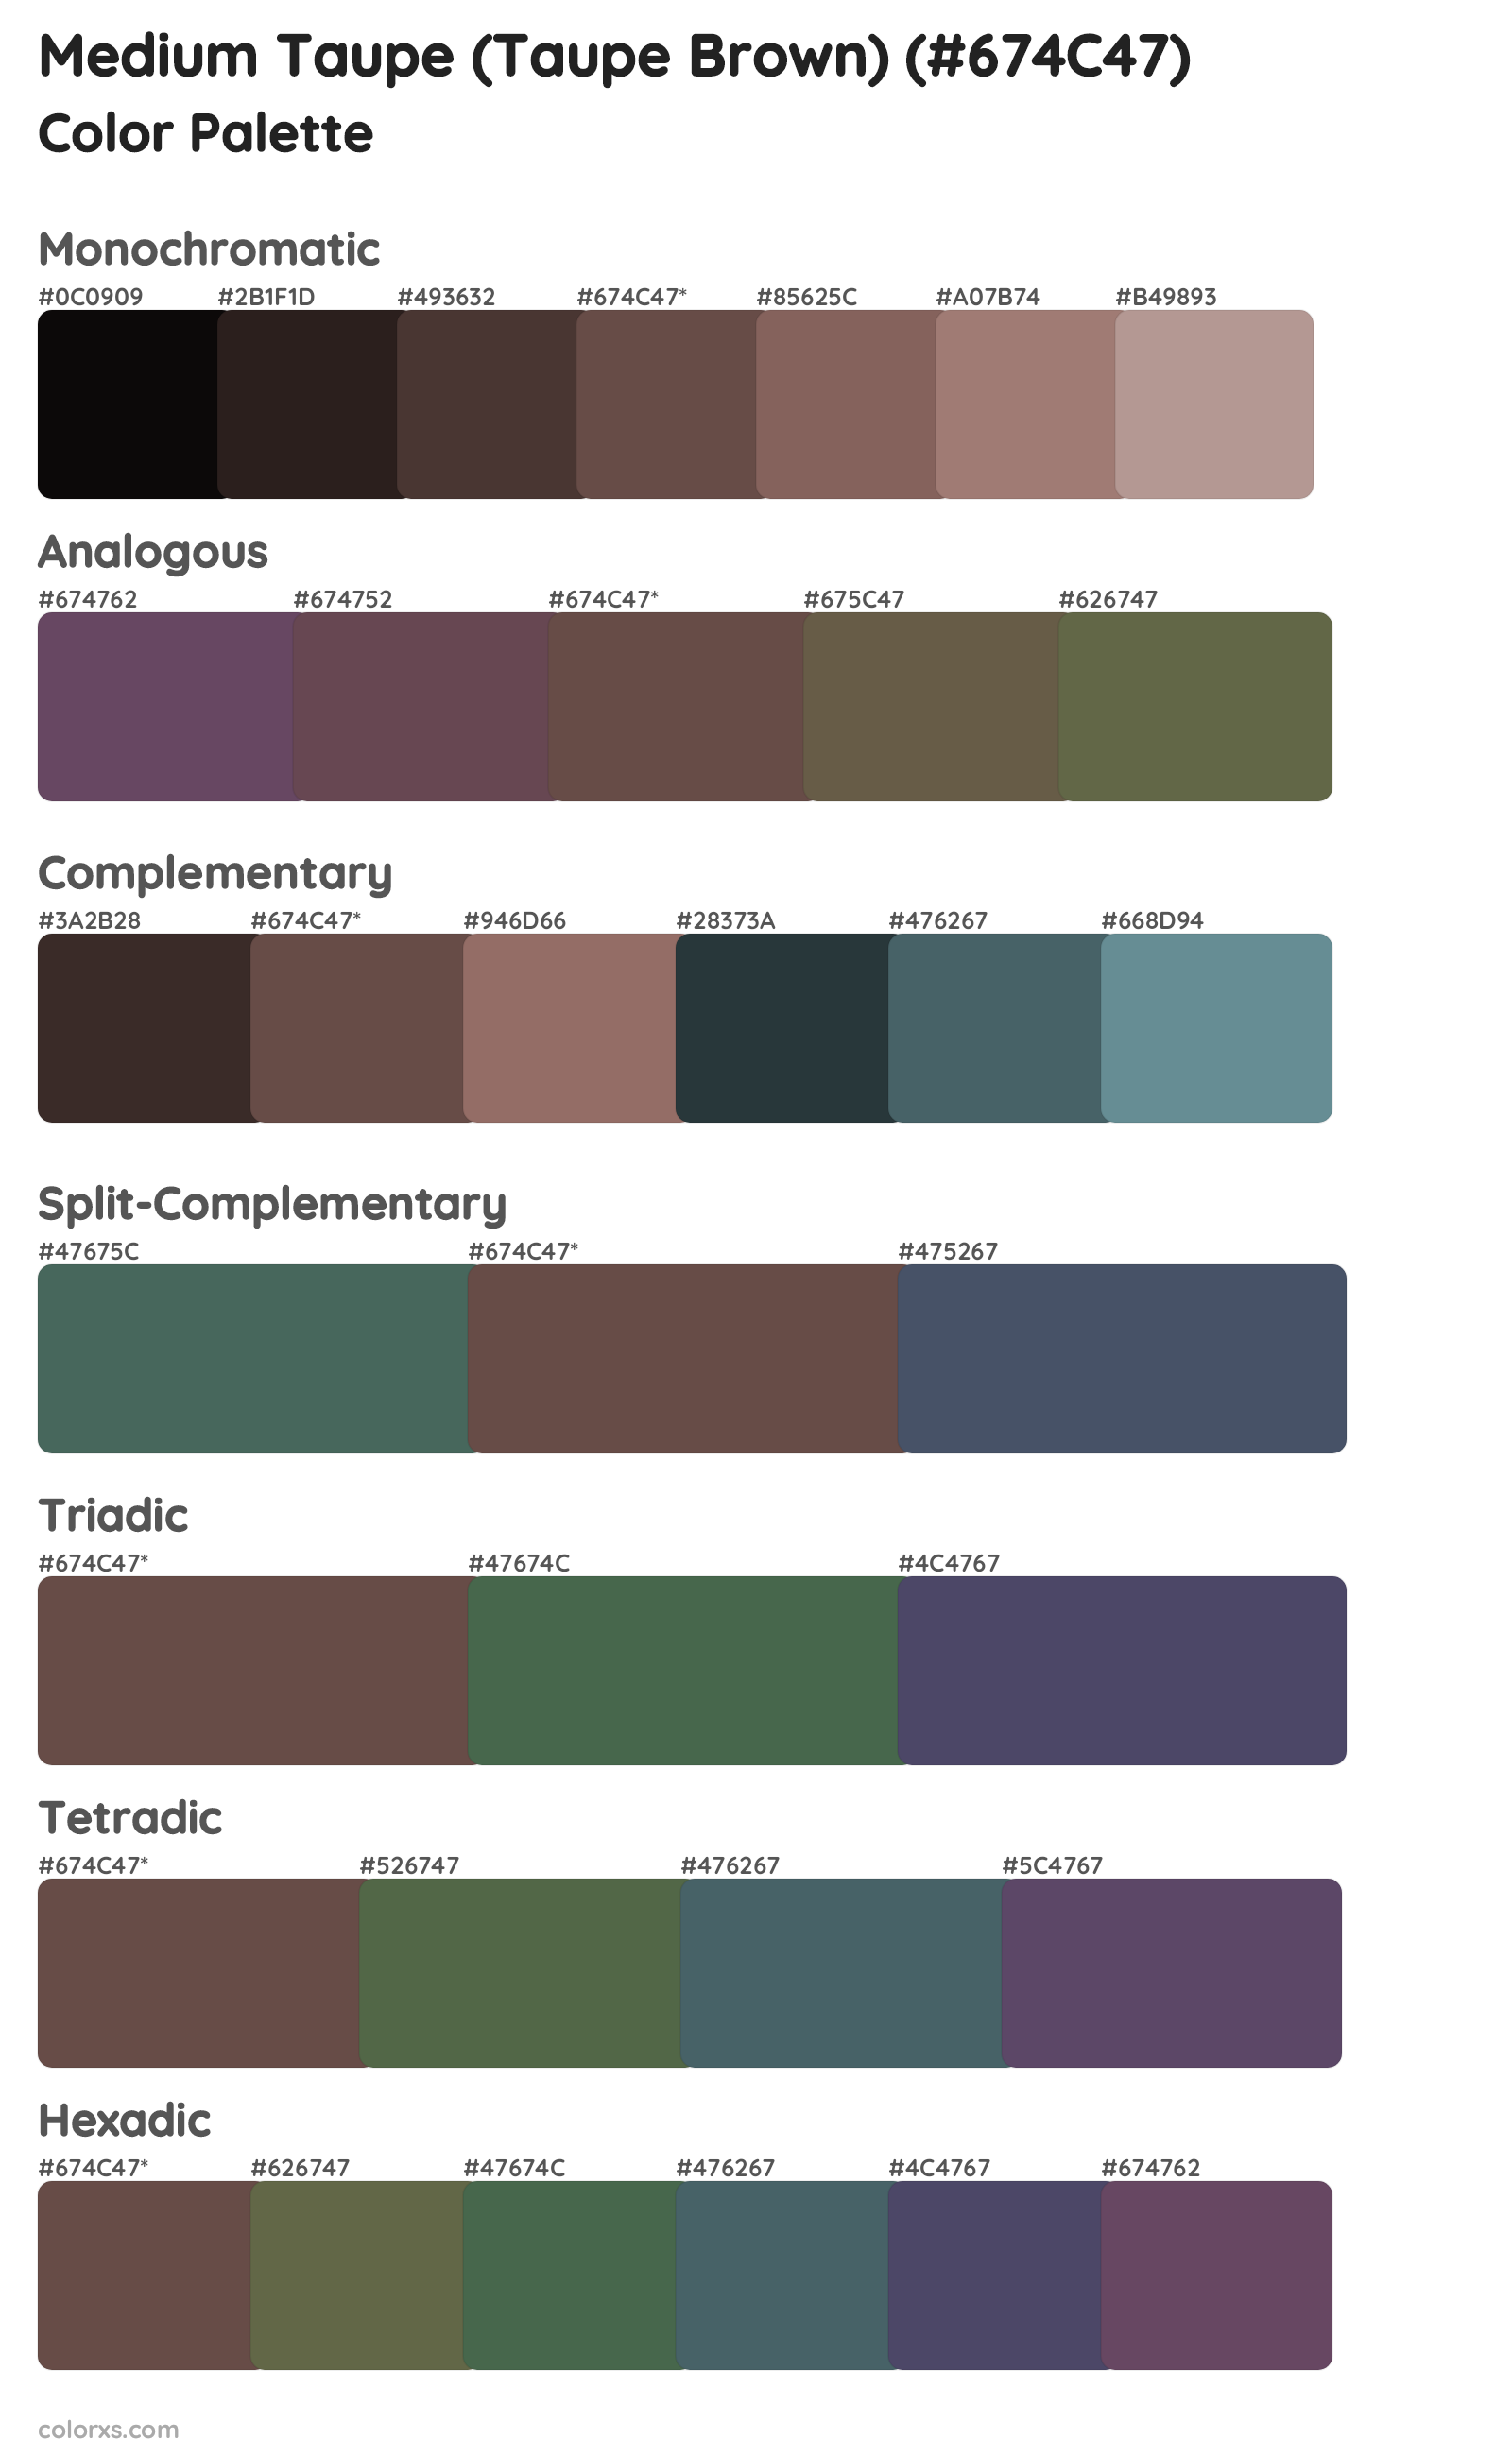 Medium Taupe (Taupe Brown) Color Scheme Palettes